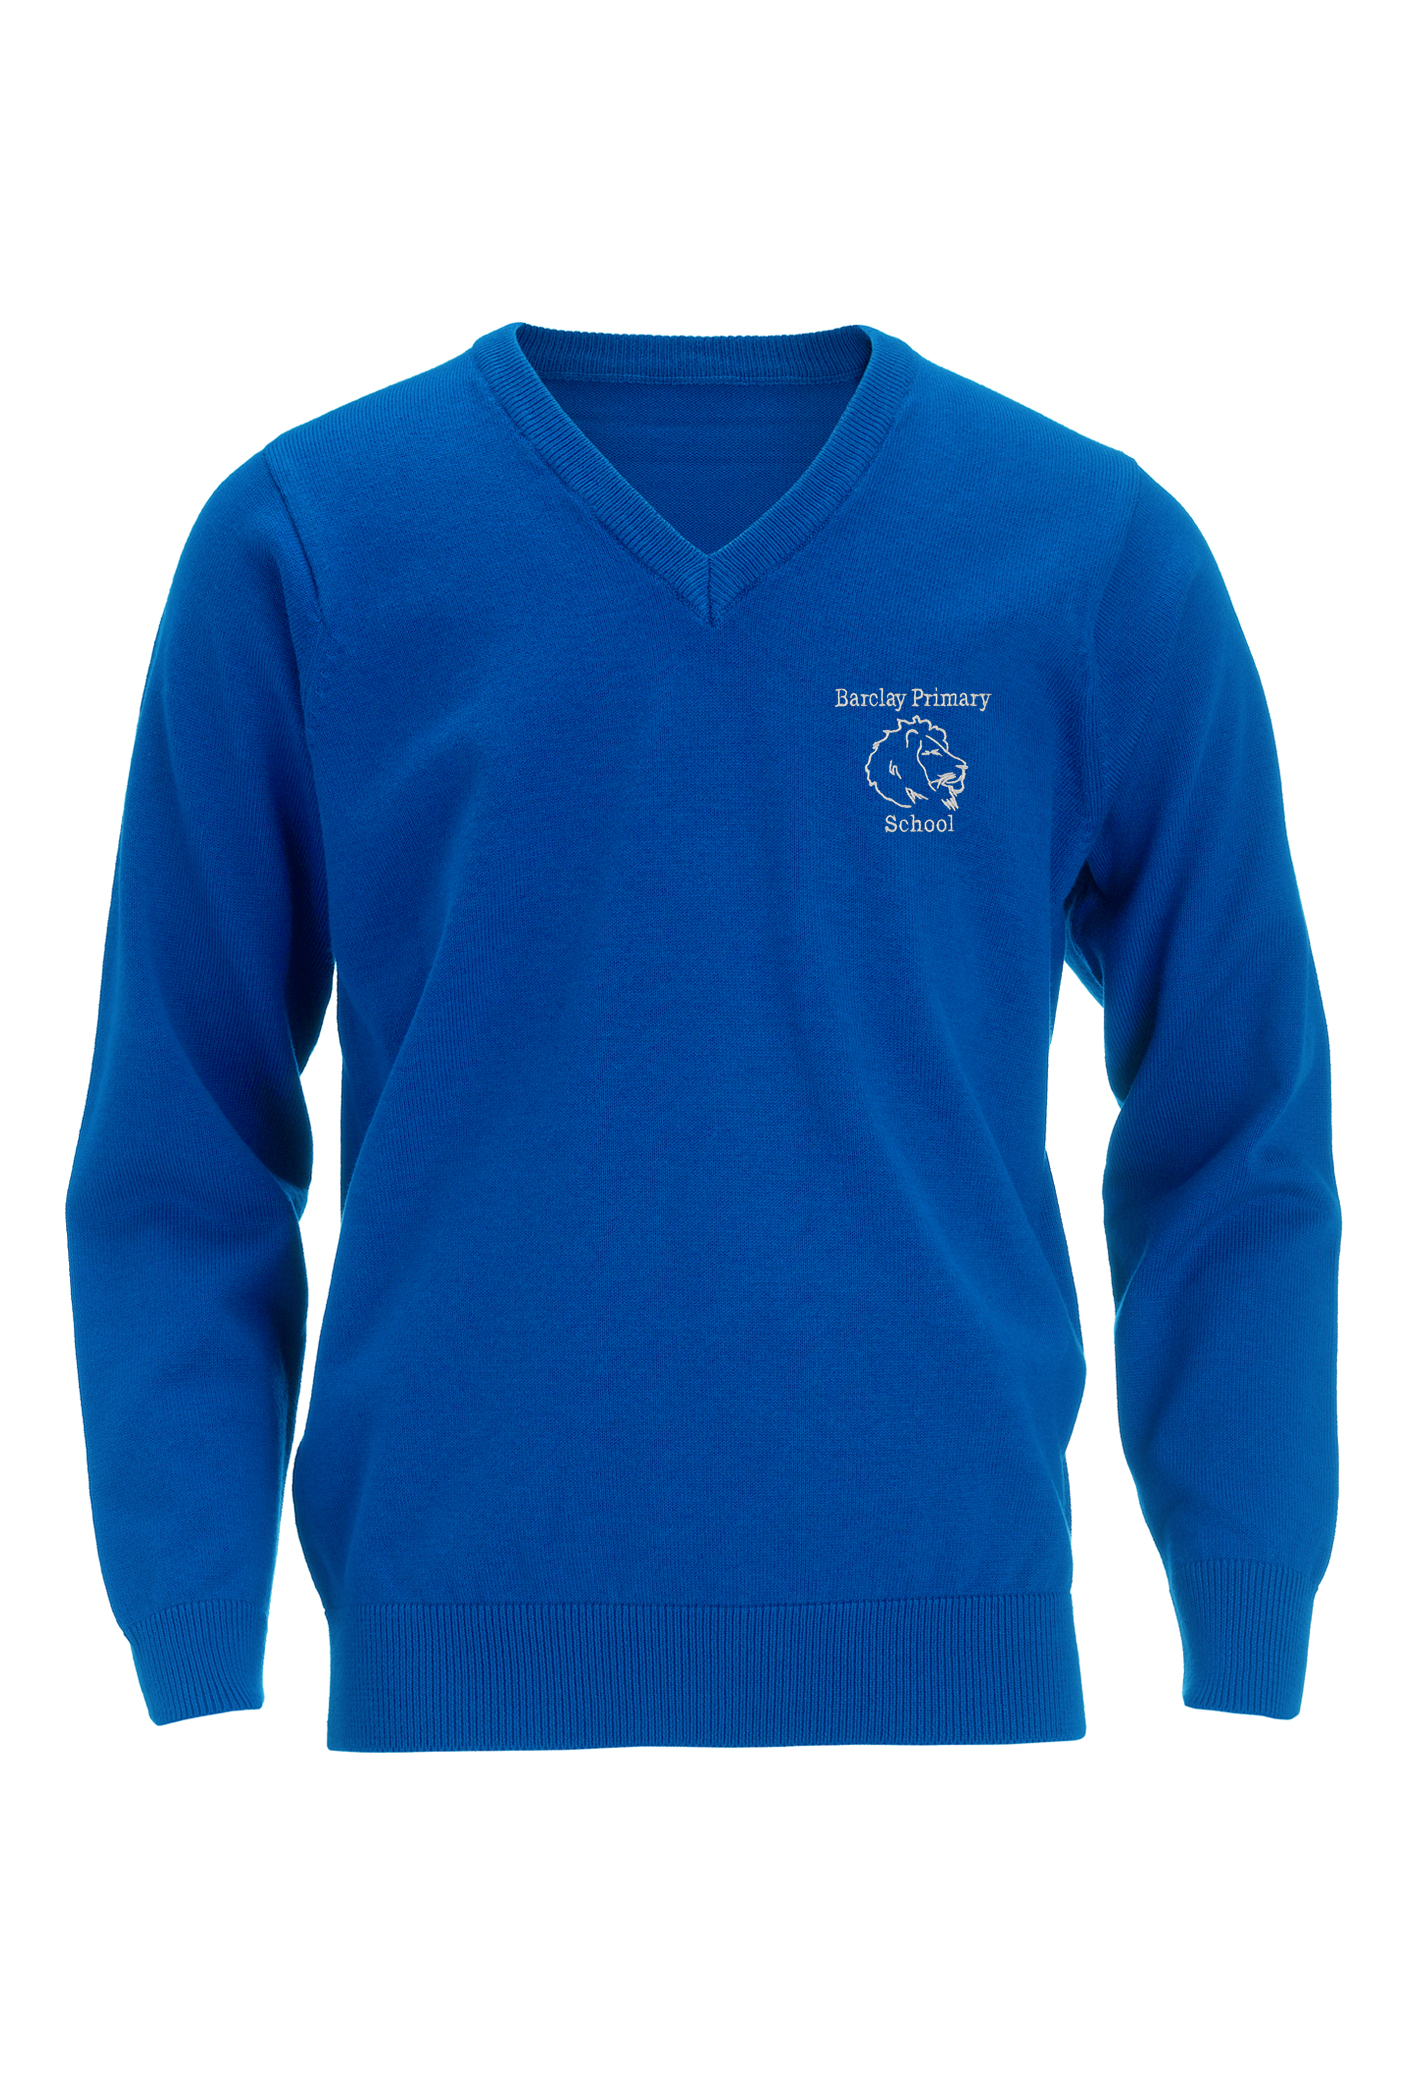 Barclay Primary School Embroidered Knitted Jumper